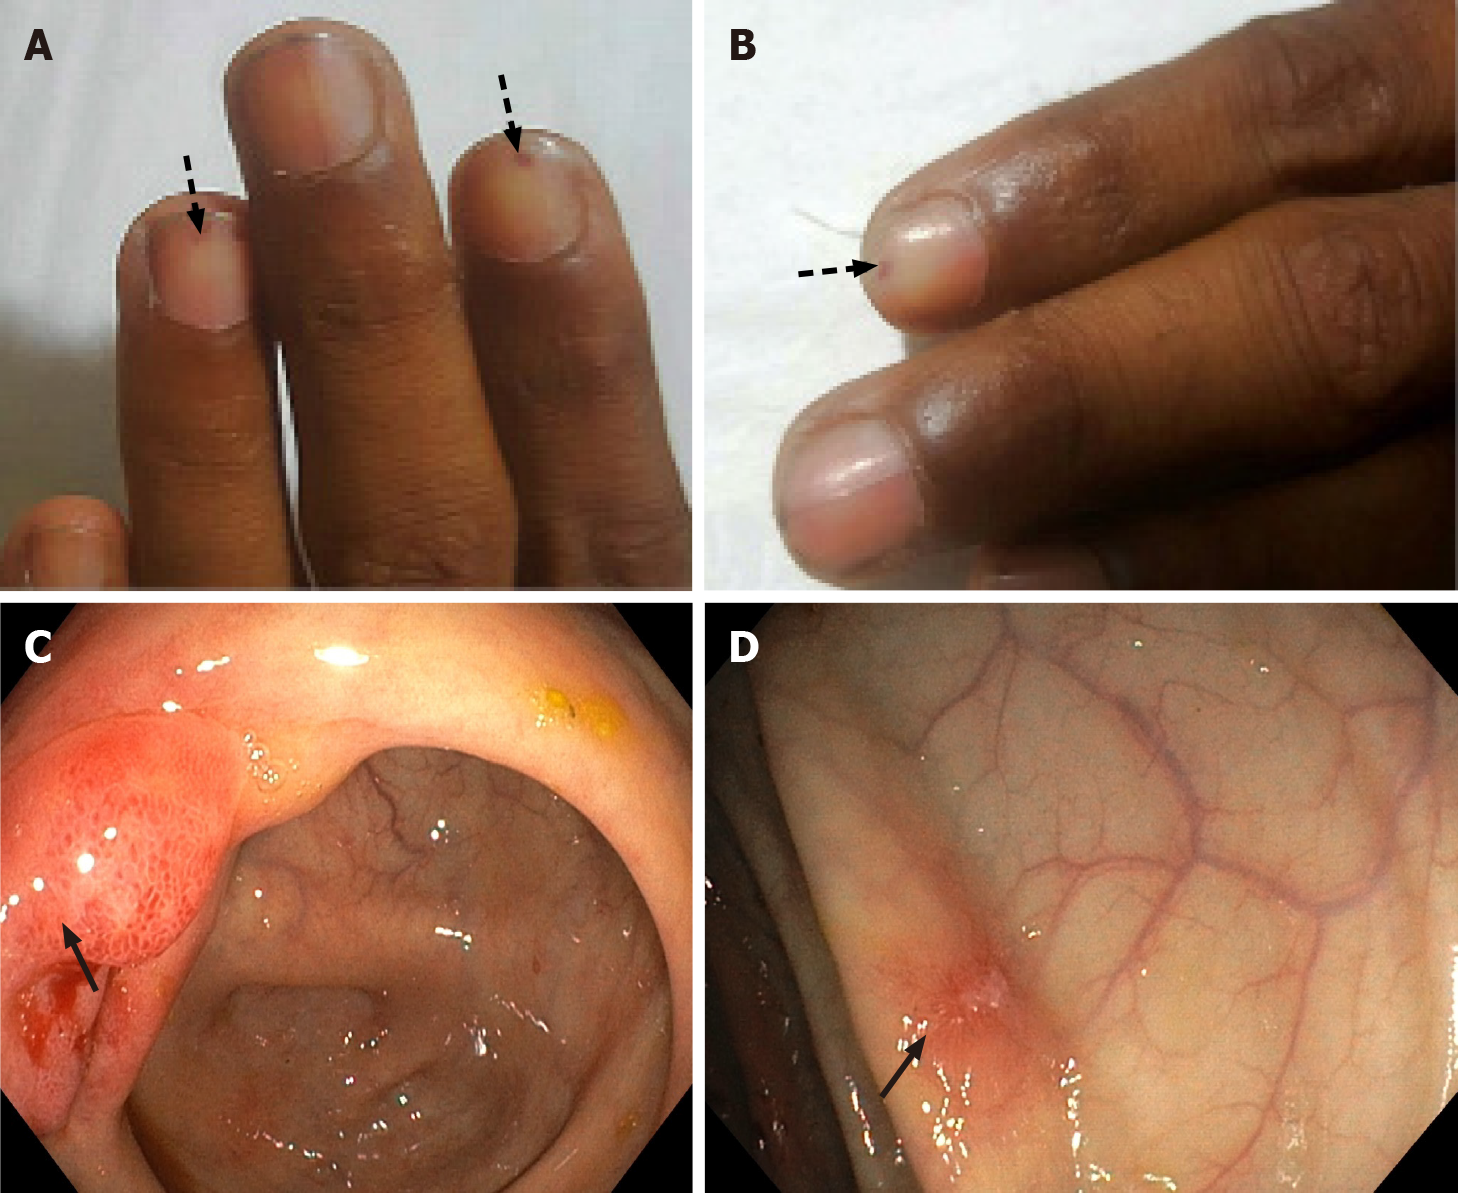 Nails in systemic disease | RCP Journals